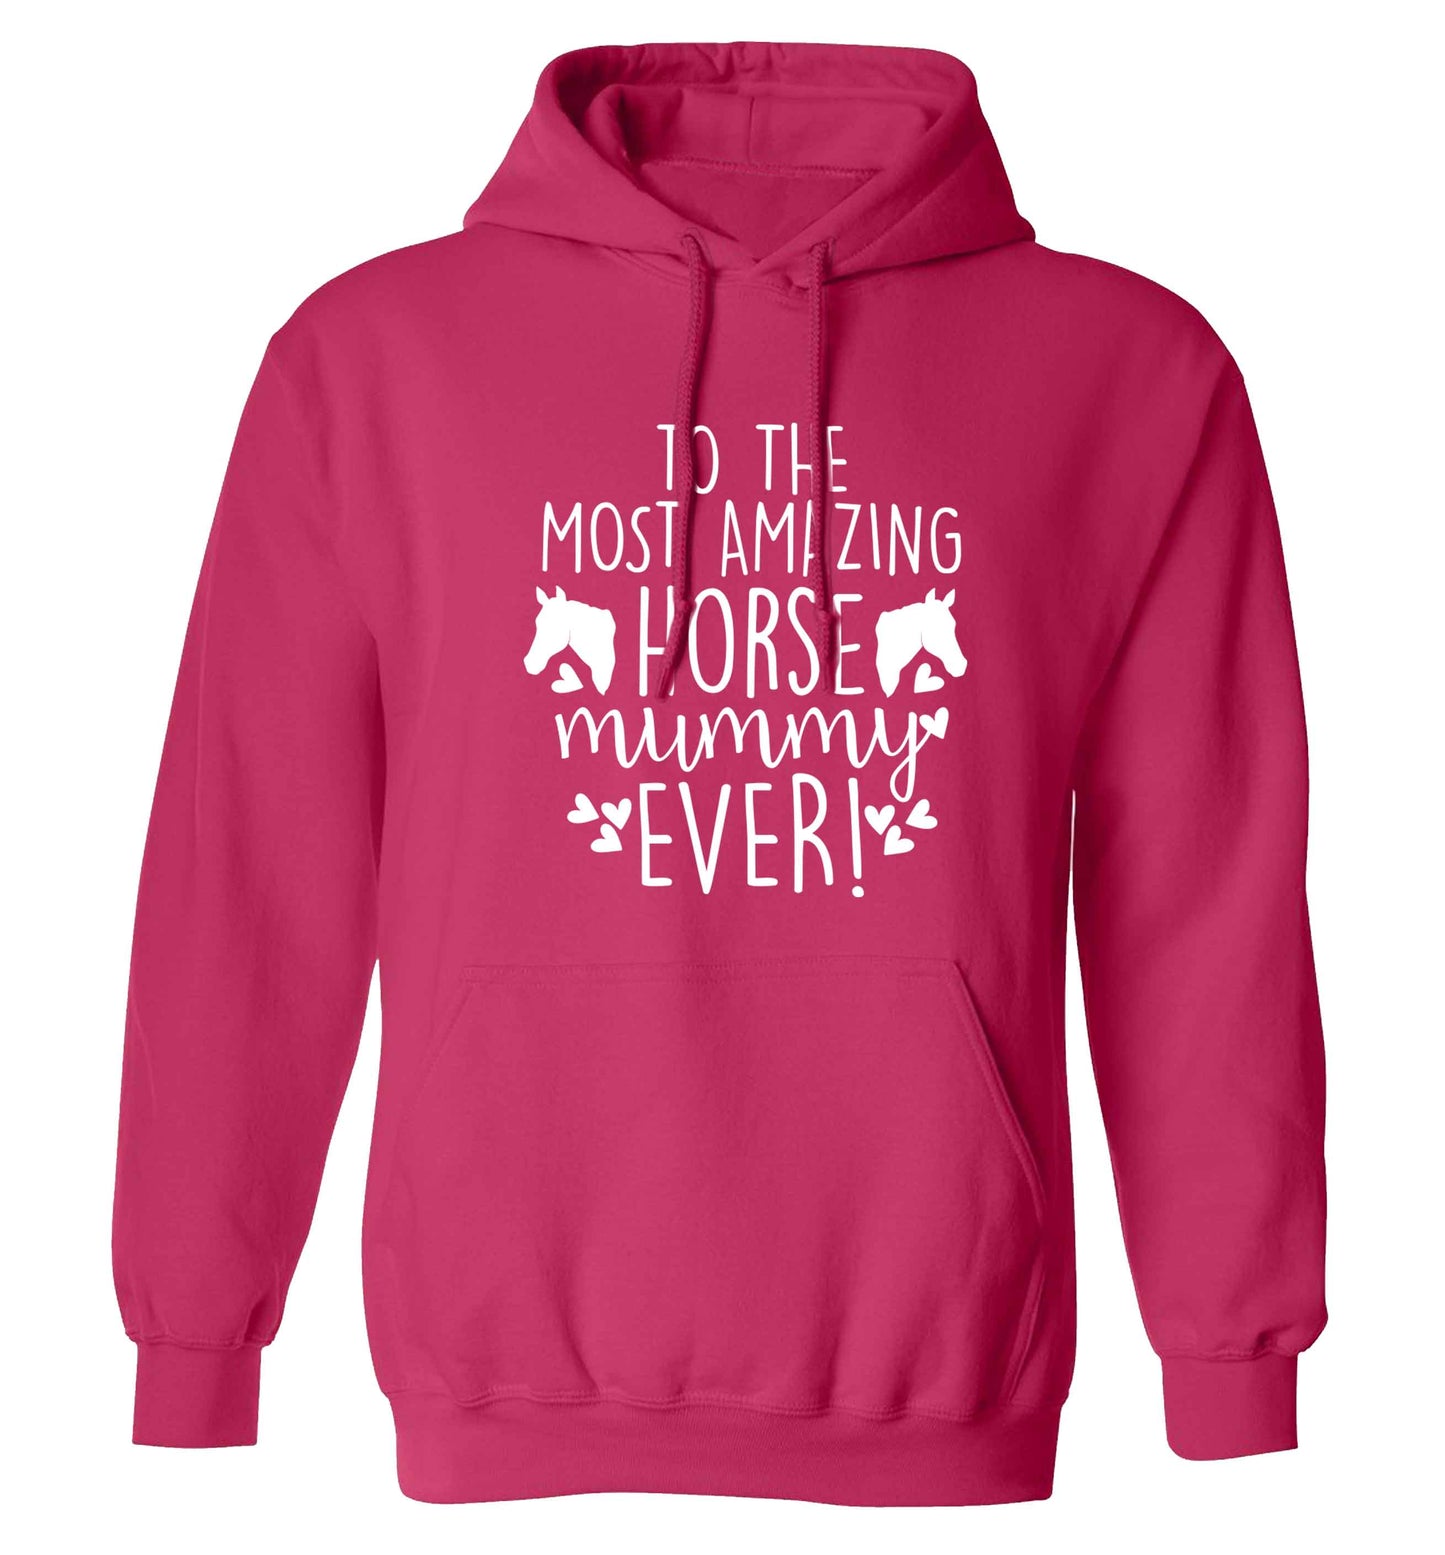 To the most amazing horse mummy ever! adults unisex pink hoodie 2XL